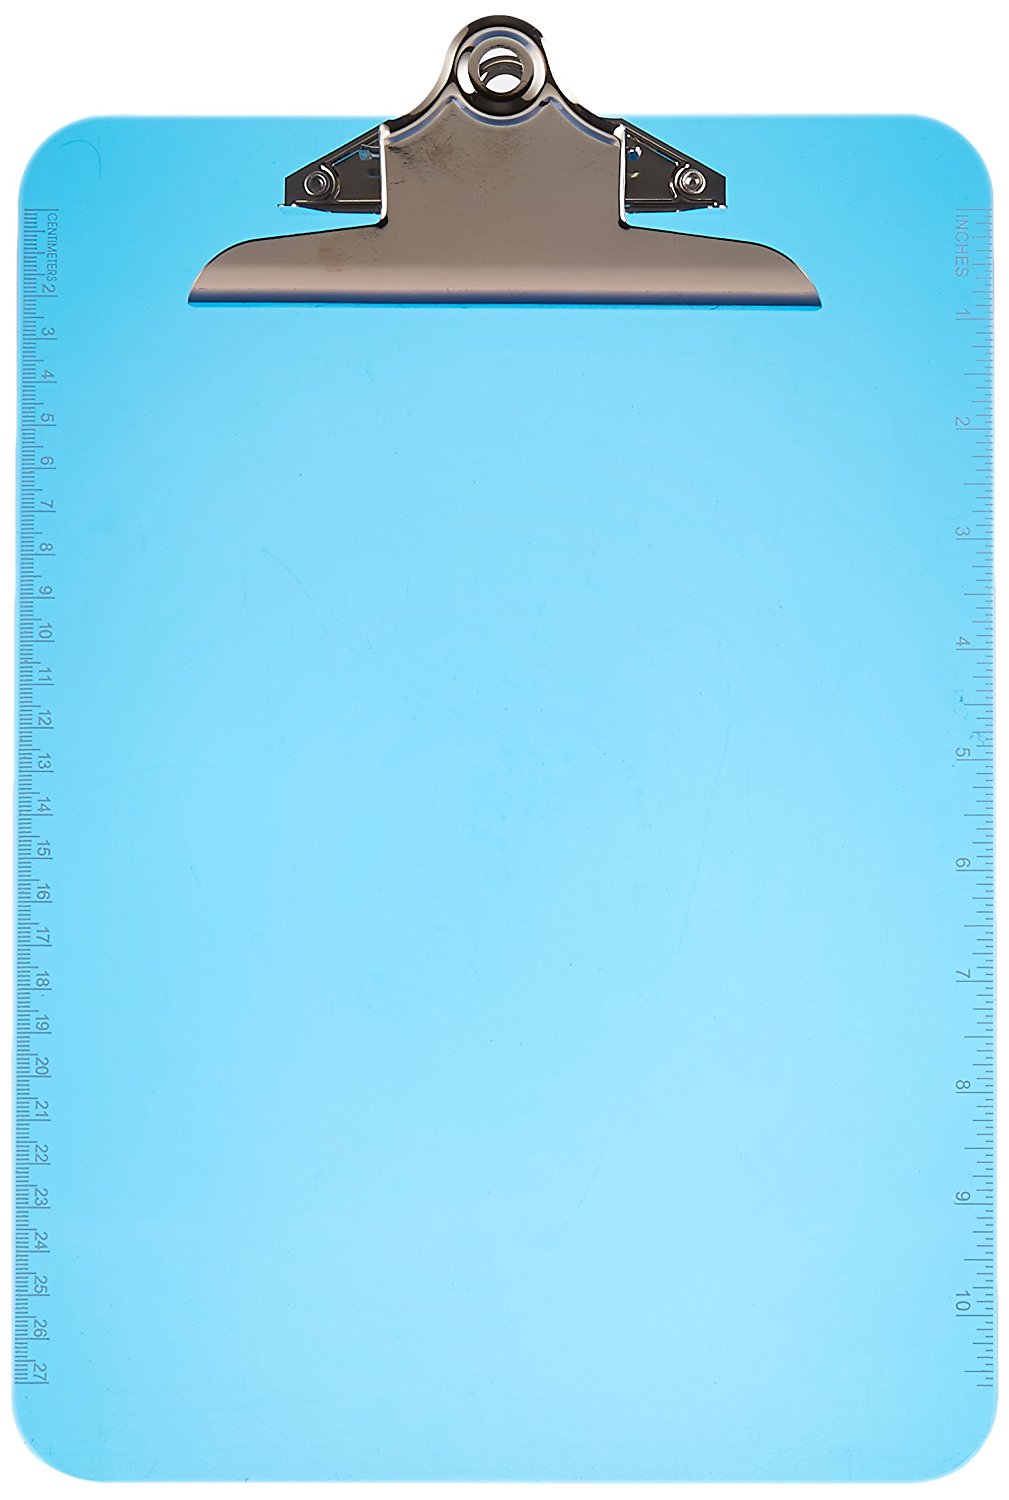 High quality multifunctional custom full color flexible plastic writing clipboard with strong metal clip